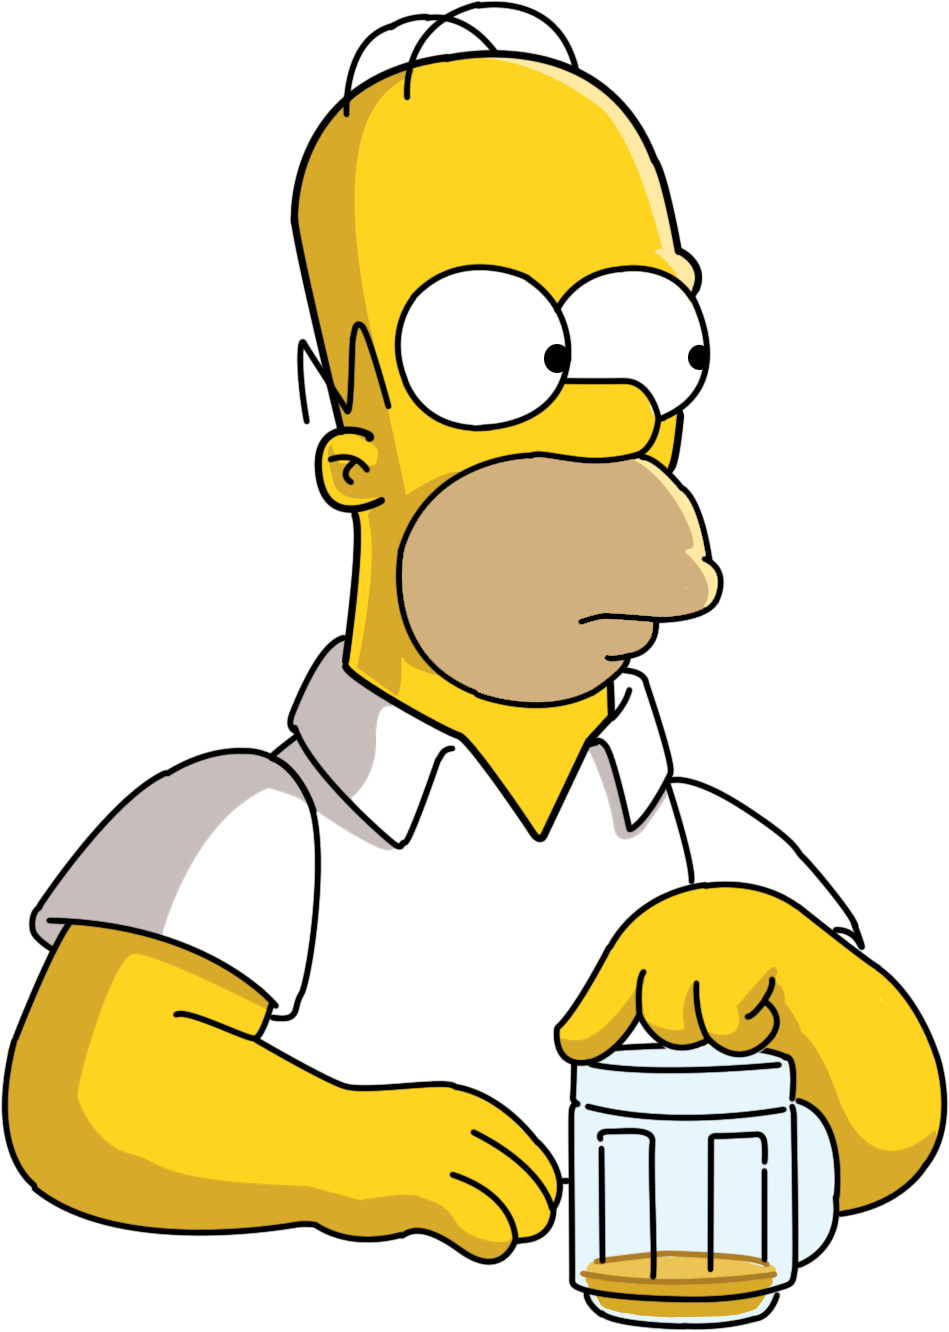 Homer Simpson, , Simpsons, Wallpapers, Wallpapers For - HD Wallpaper 